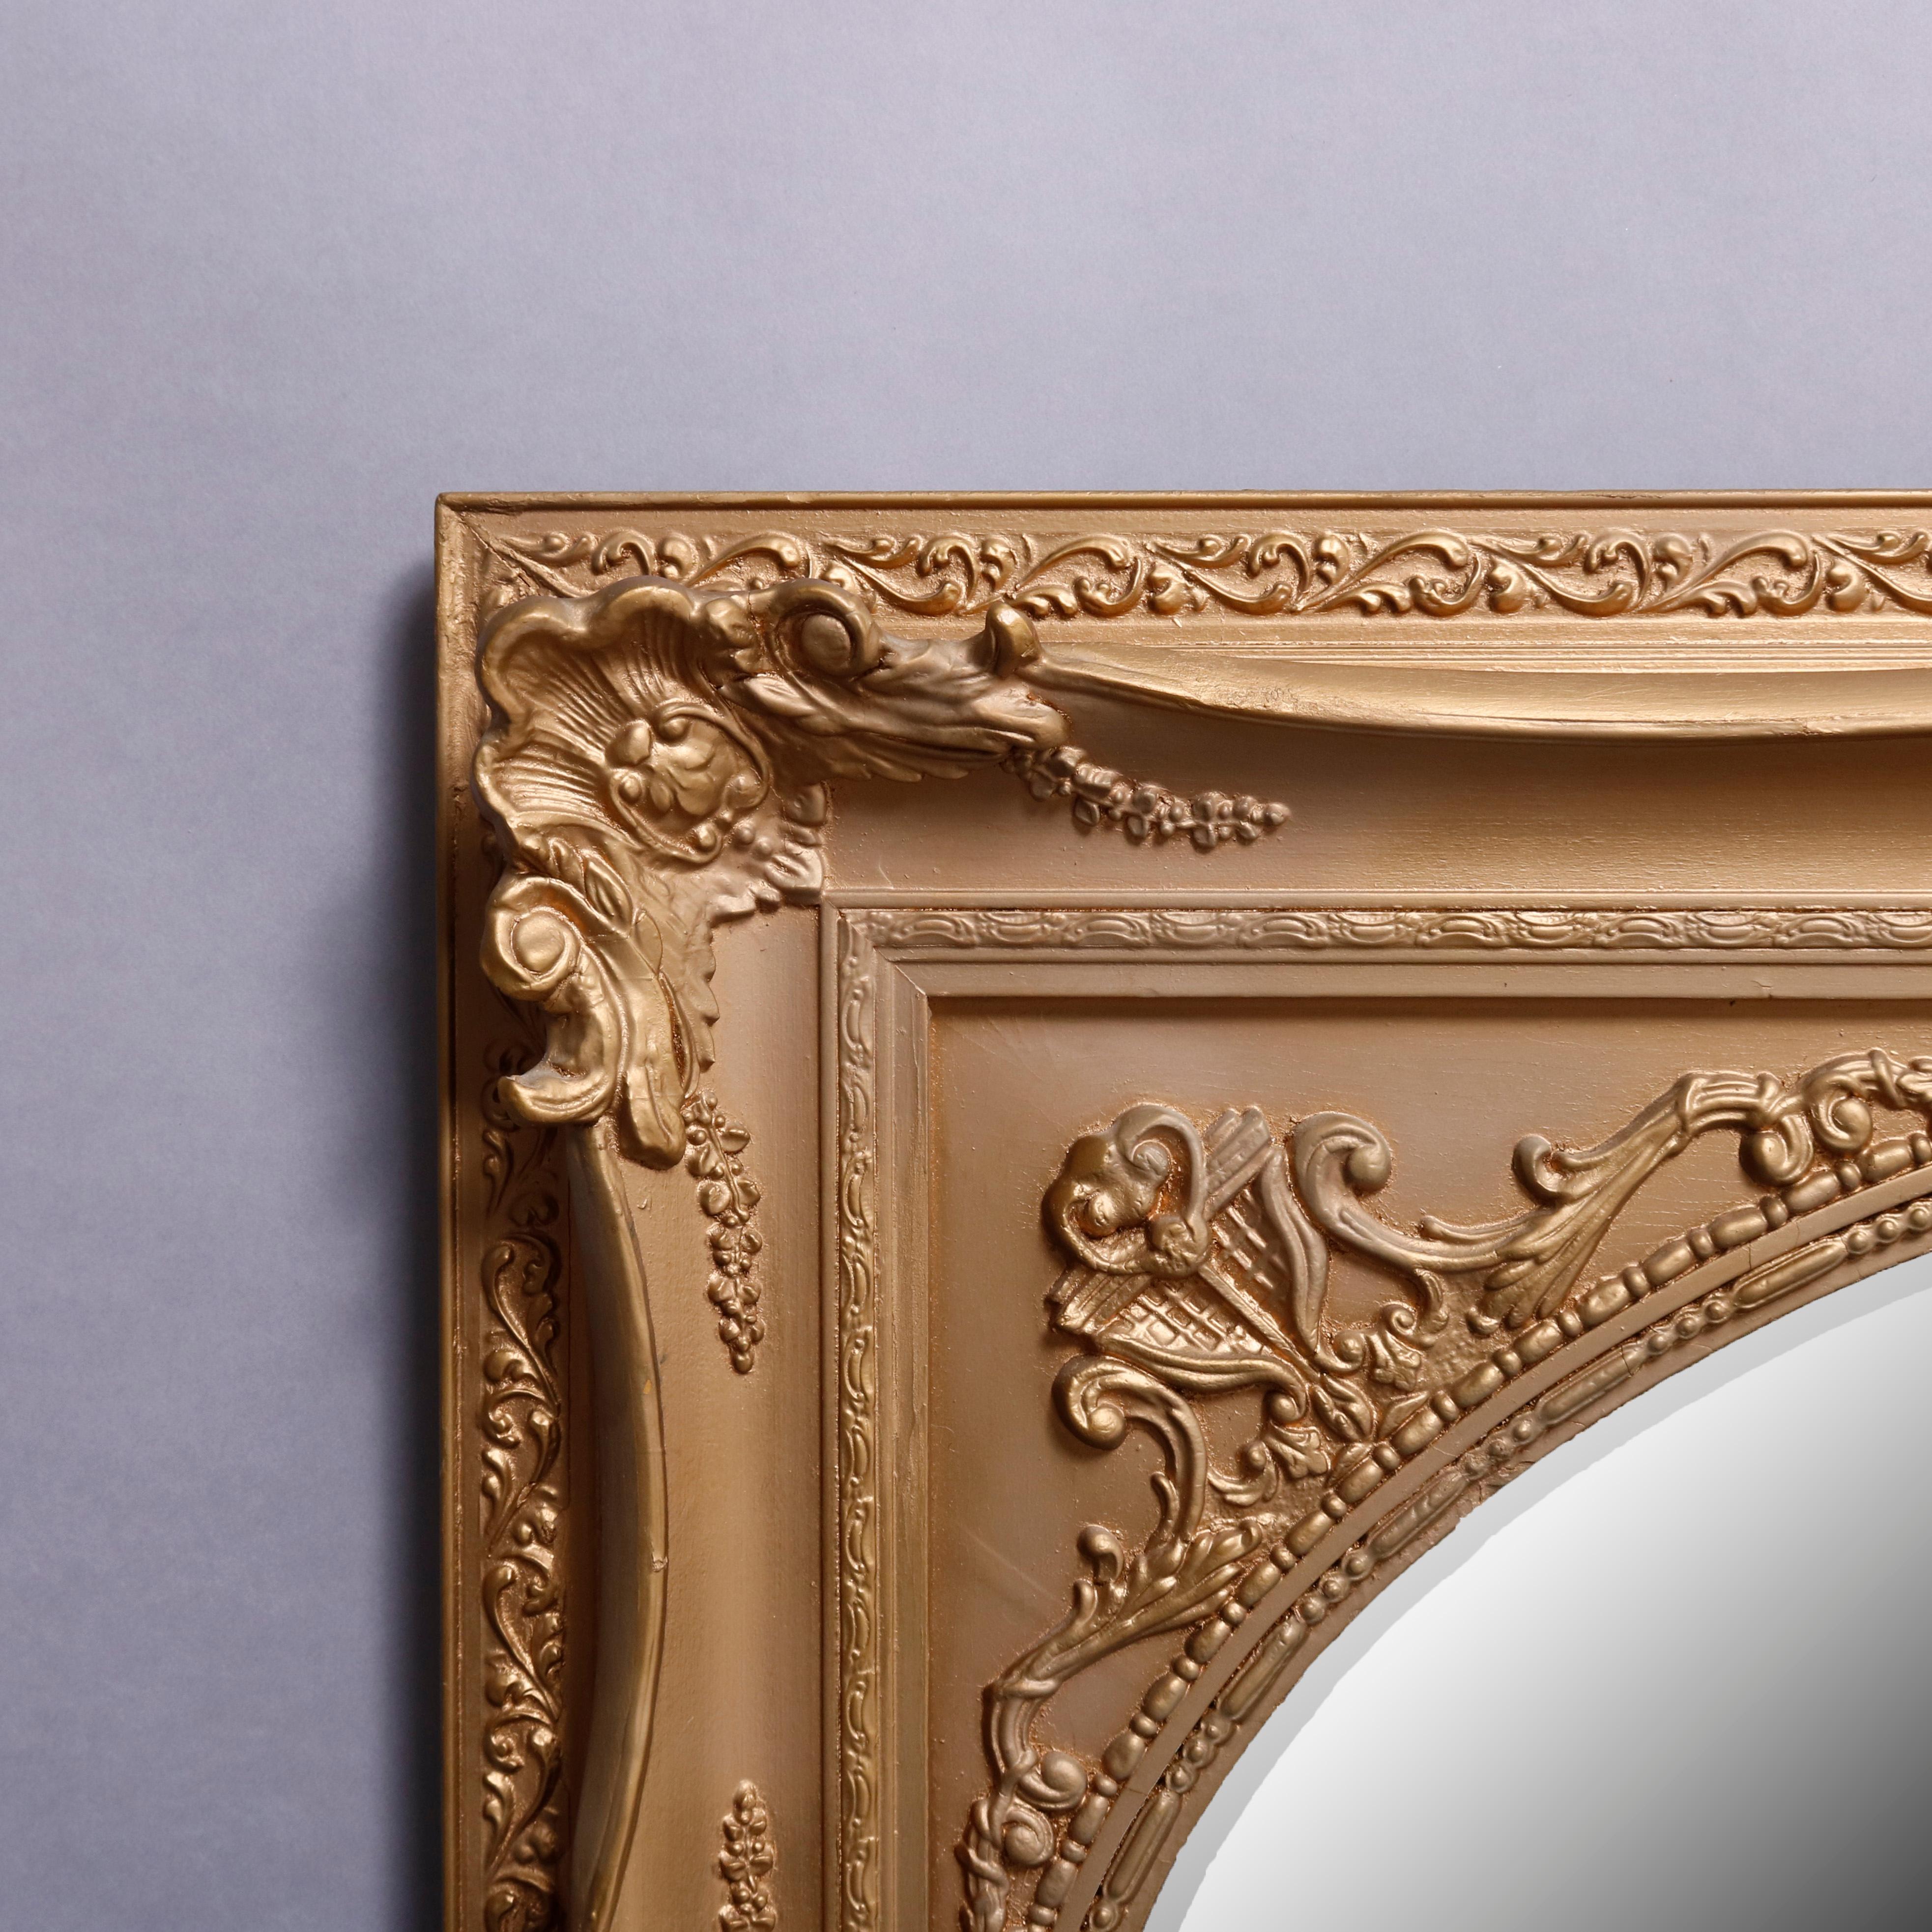 A vintage Louis XIV style giltwood wall mirror offers rectangular foliate and scroll decorated surround and oval beveled mirror, en verso original label, 20th century

Measures: 32.5